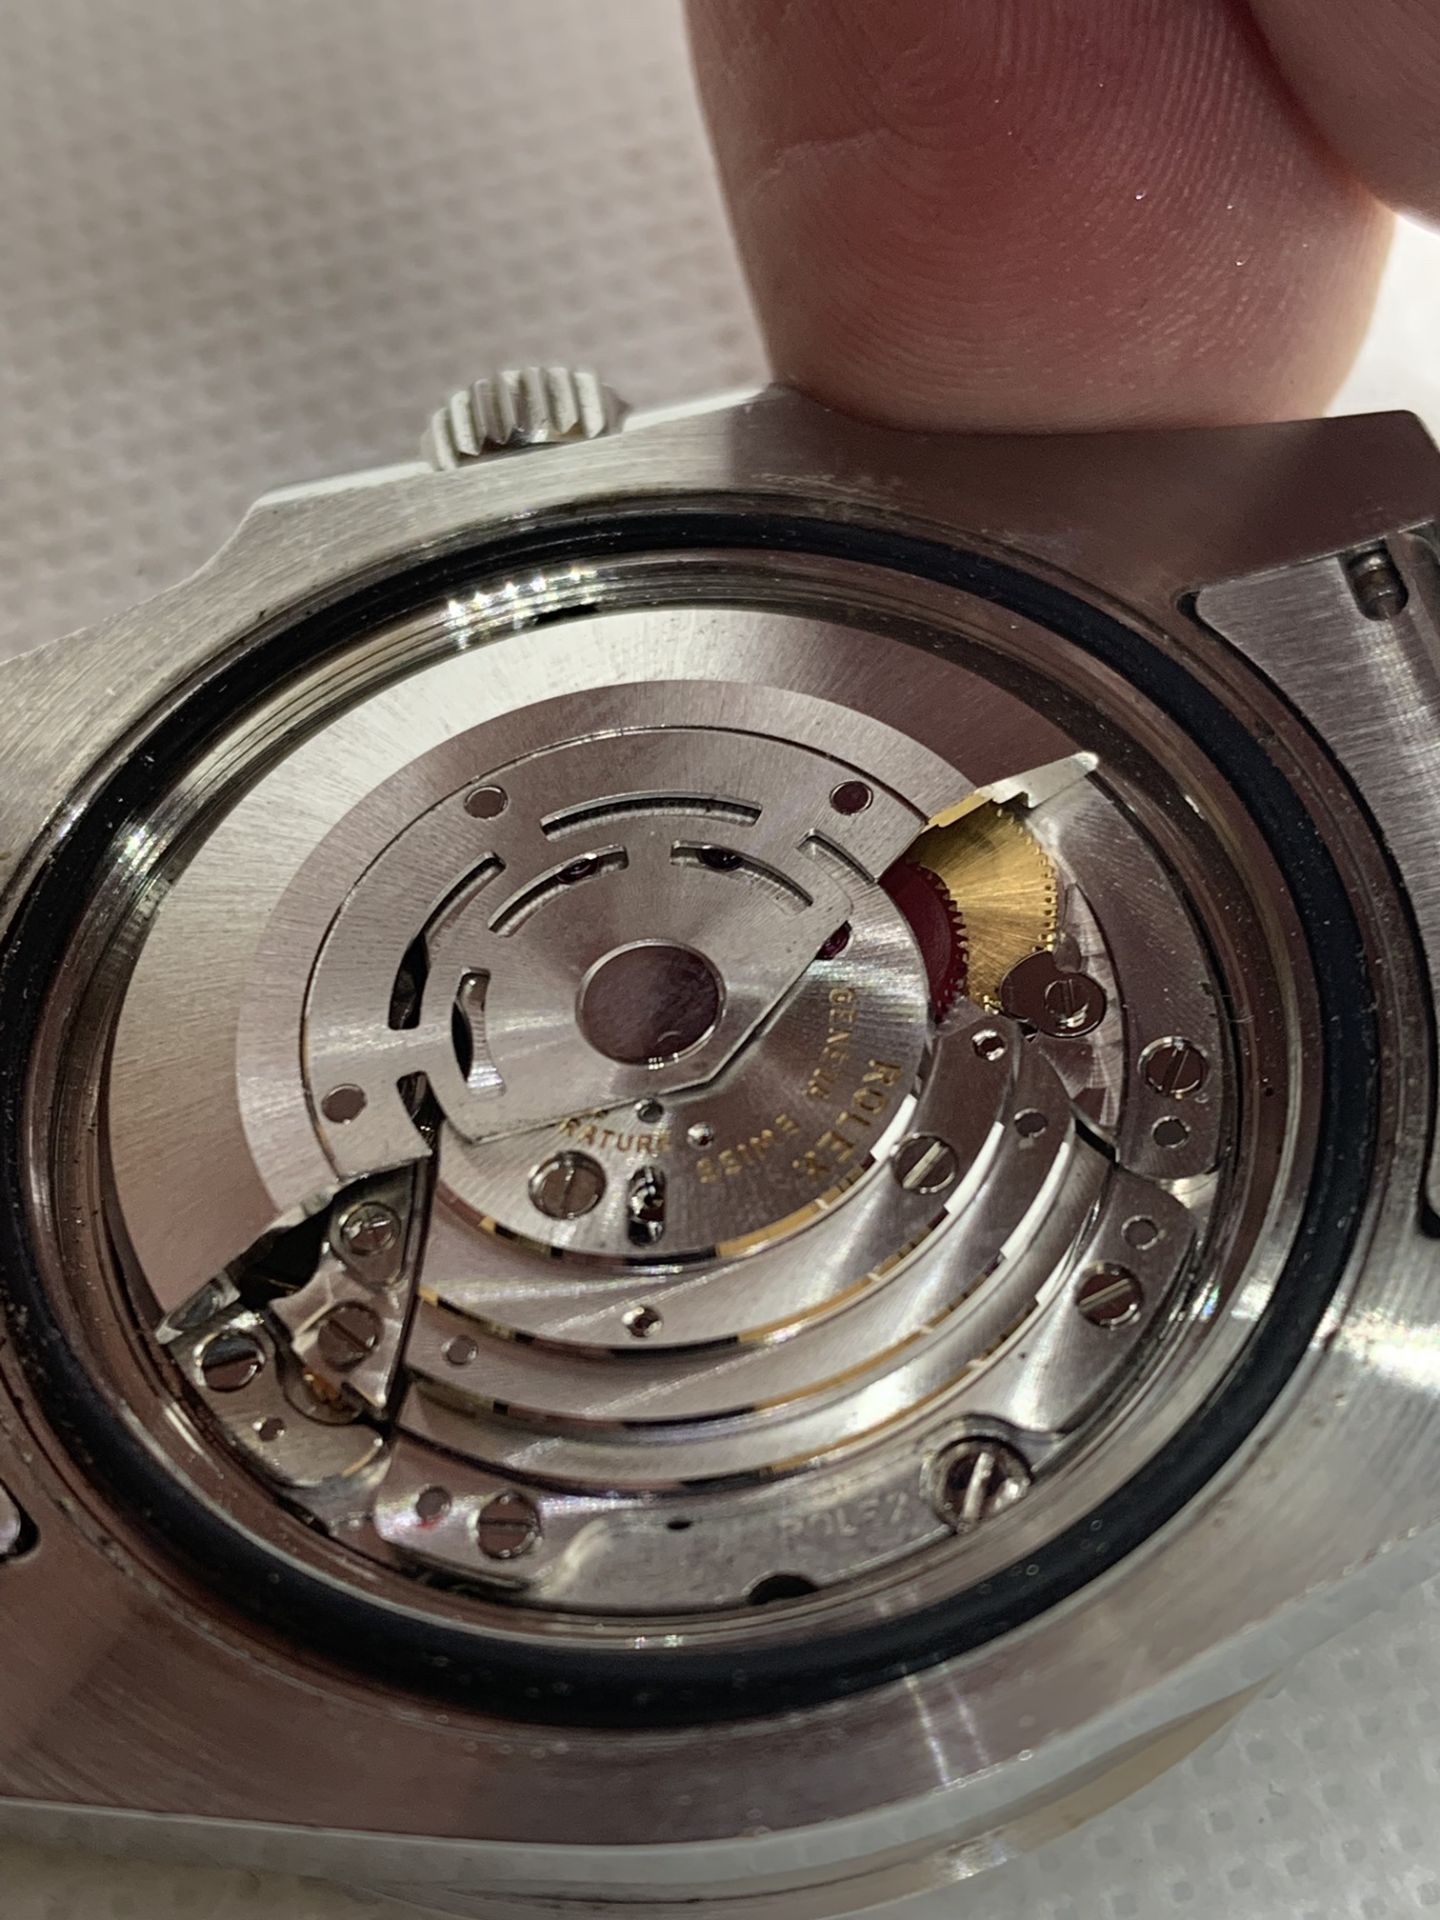 ROLEX SUBMARINER 3135 MOVEMENT WITH S/S METAL WATCH CASE - Image 10 of 13